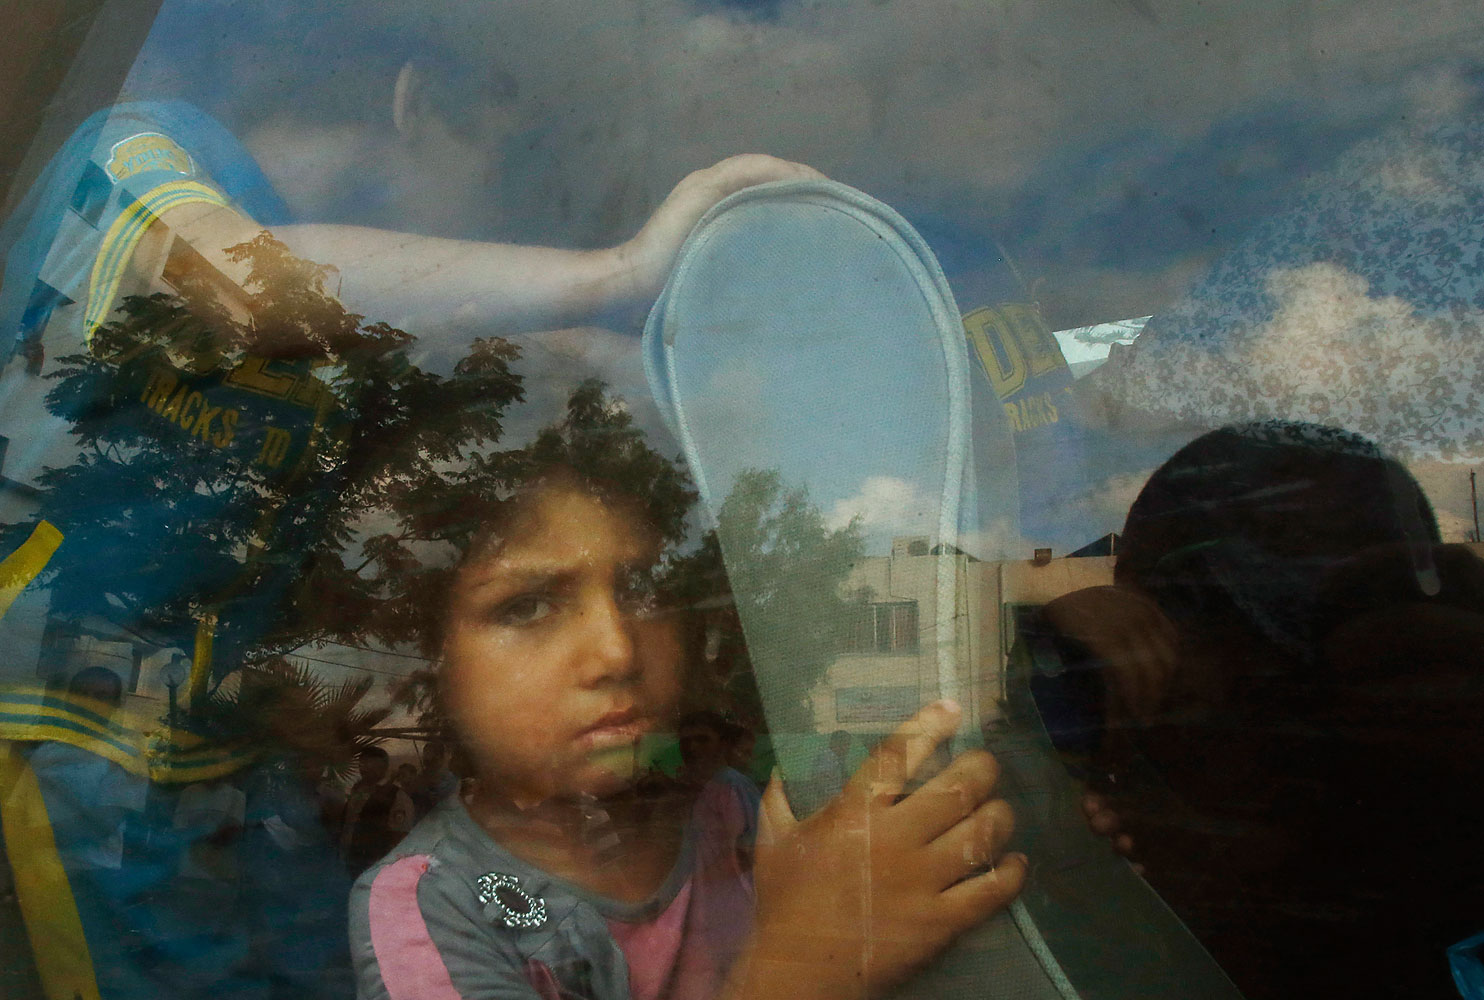 A Palestinian girl sits in a minibus after fleeing her family's house during heavy Israeli shelling, in Gaza City